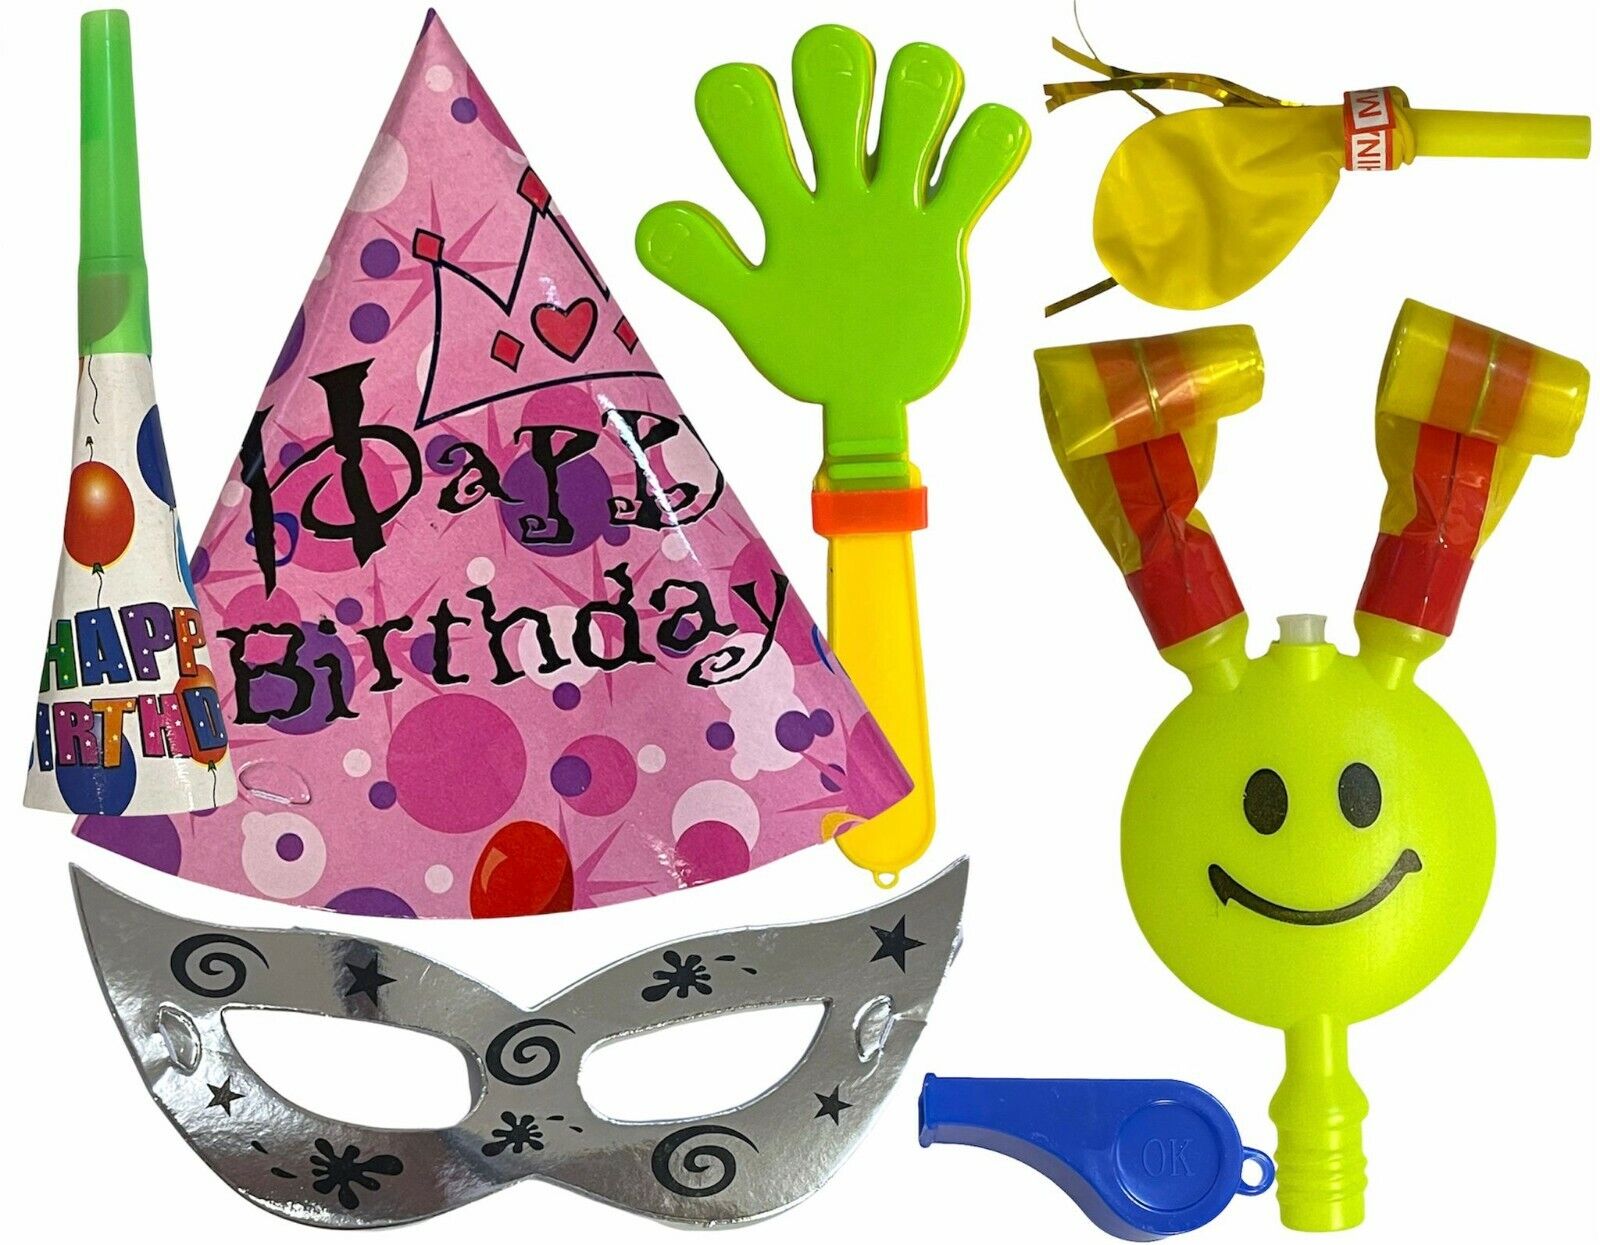 Beclen Harp Party Blowers Birthday Horn New Year Trumpet Blowouts Loot Balloon Party Set-7pc